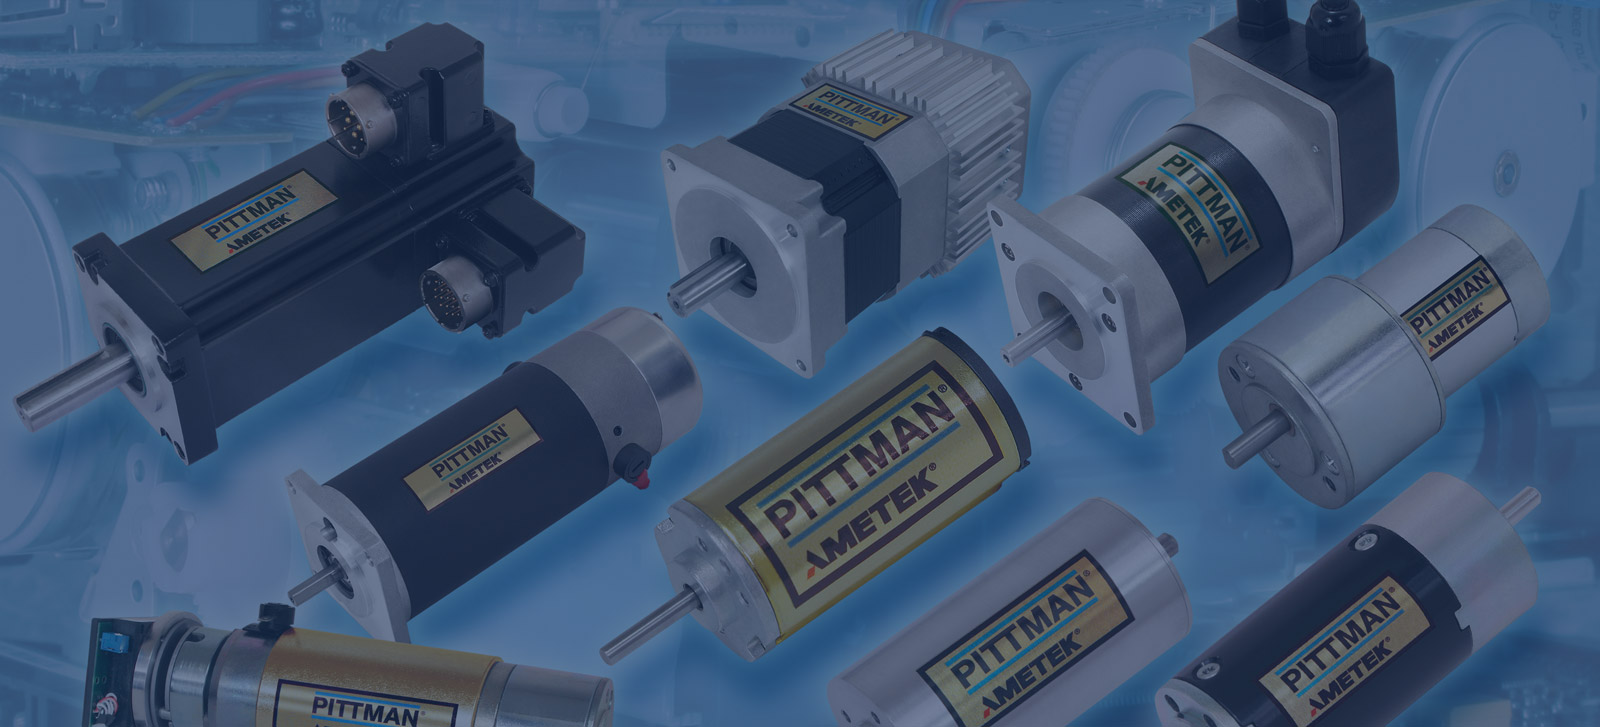 Brushed and brushless motors available in various technologies